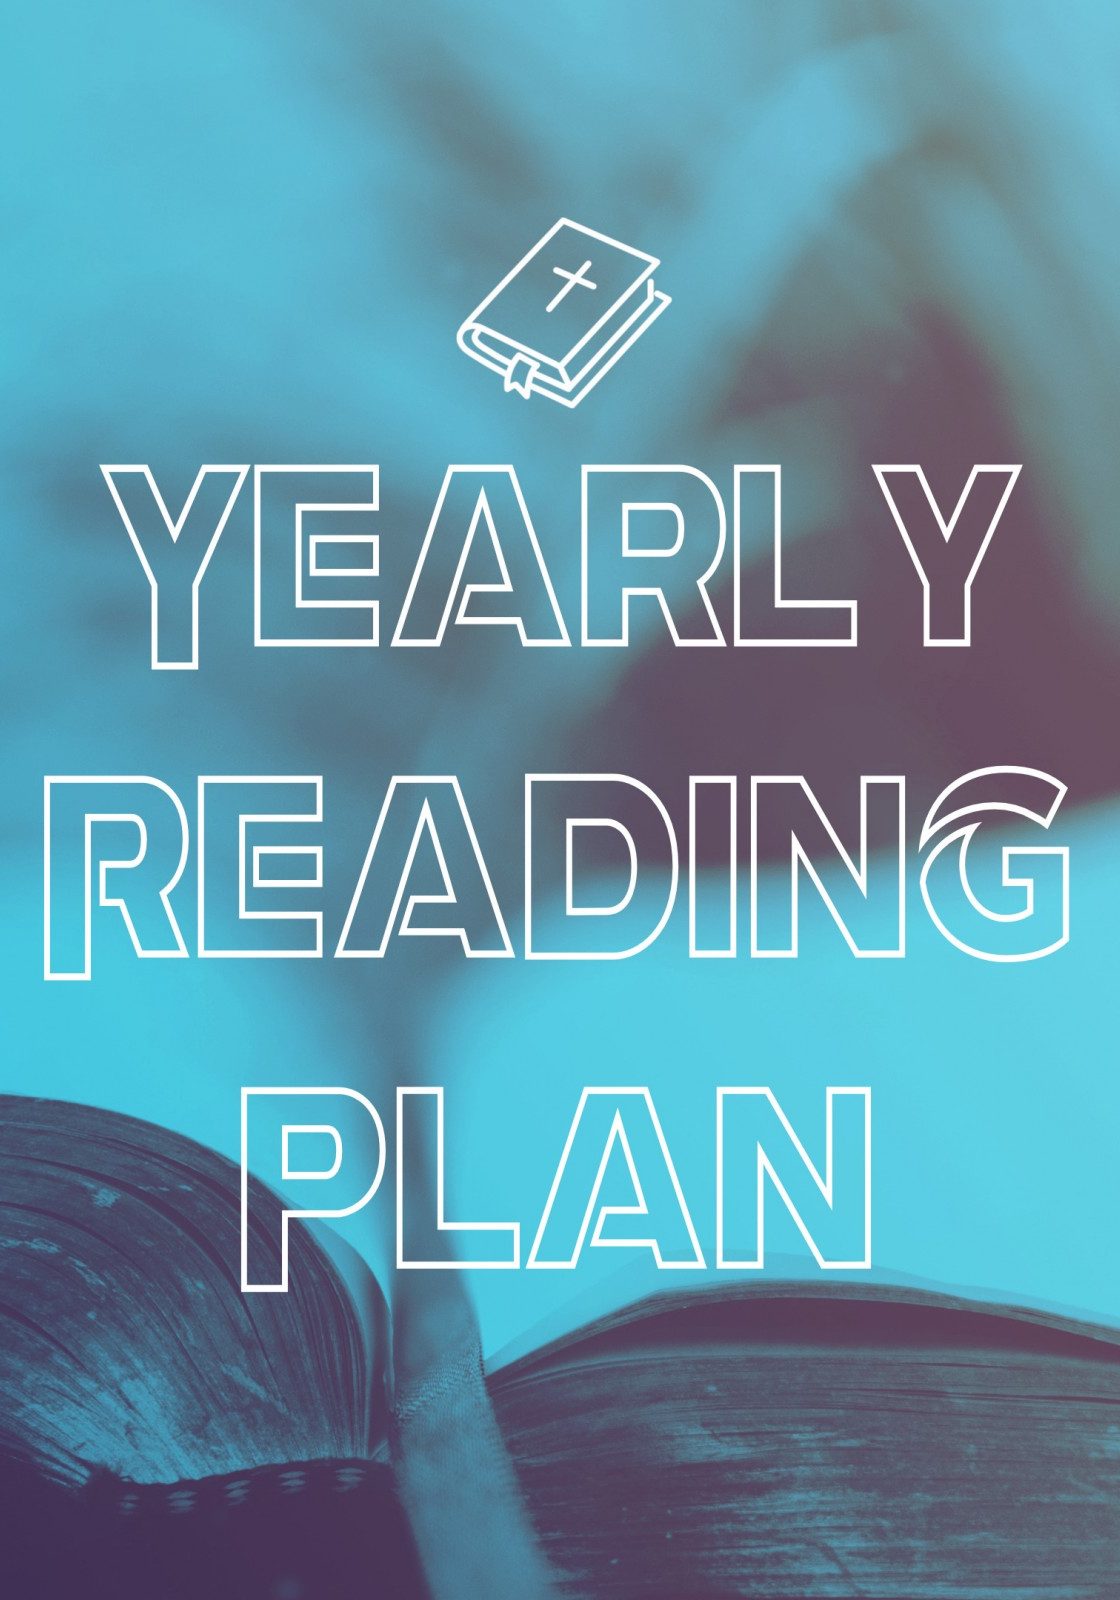 Yearly Reading Plan Graphic